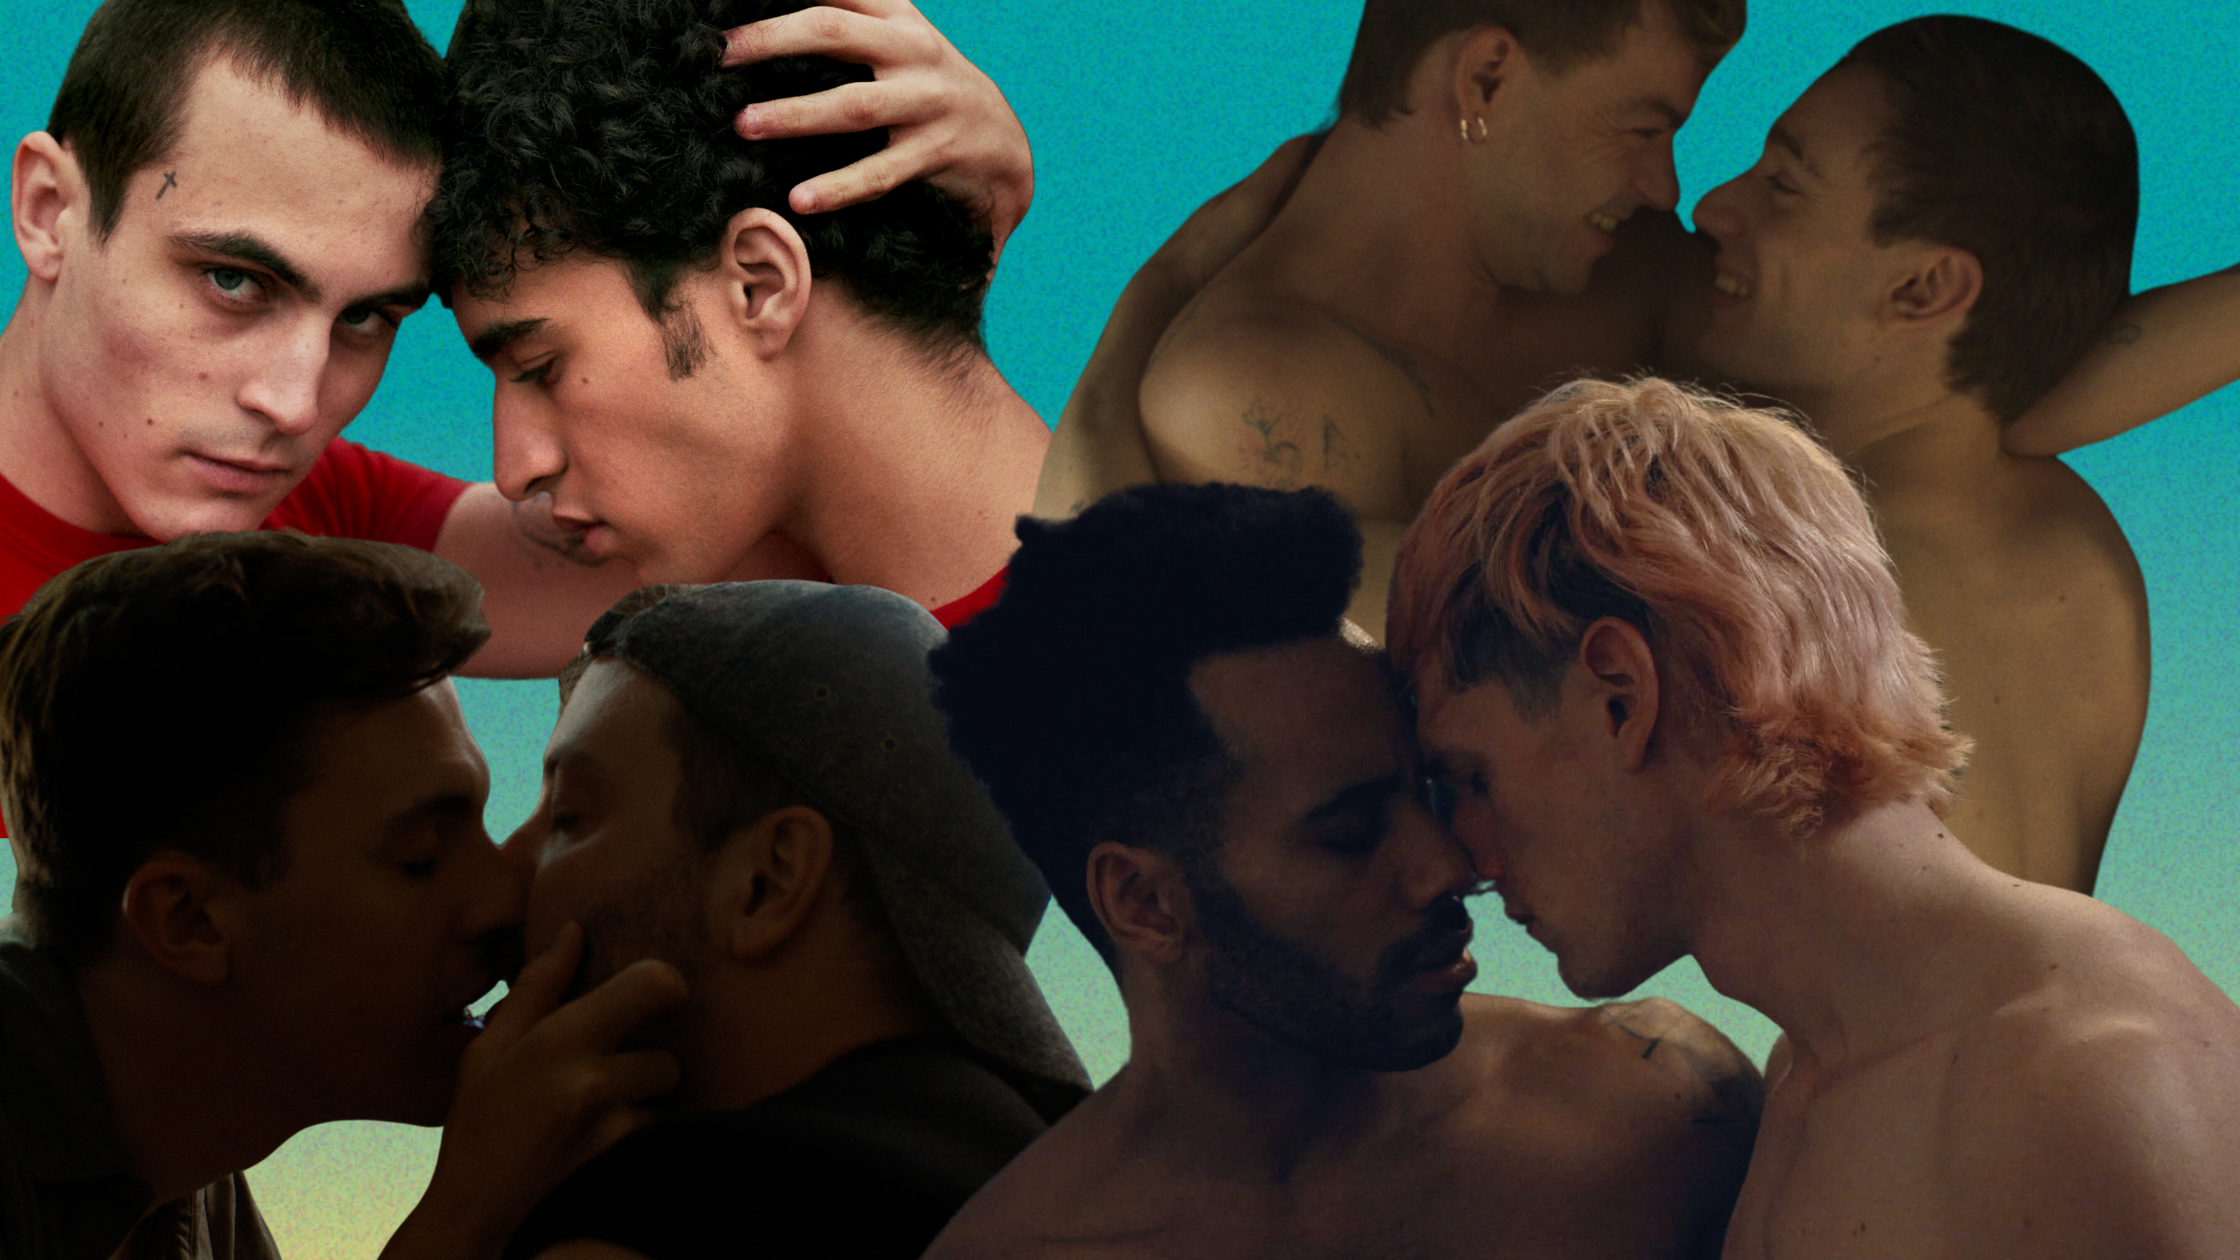 A collage of stills of people kissing or embracing from films included in the MGFF24 program.